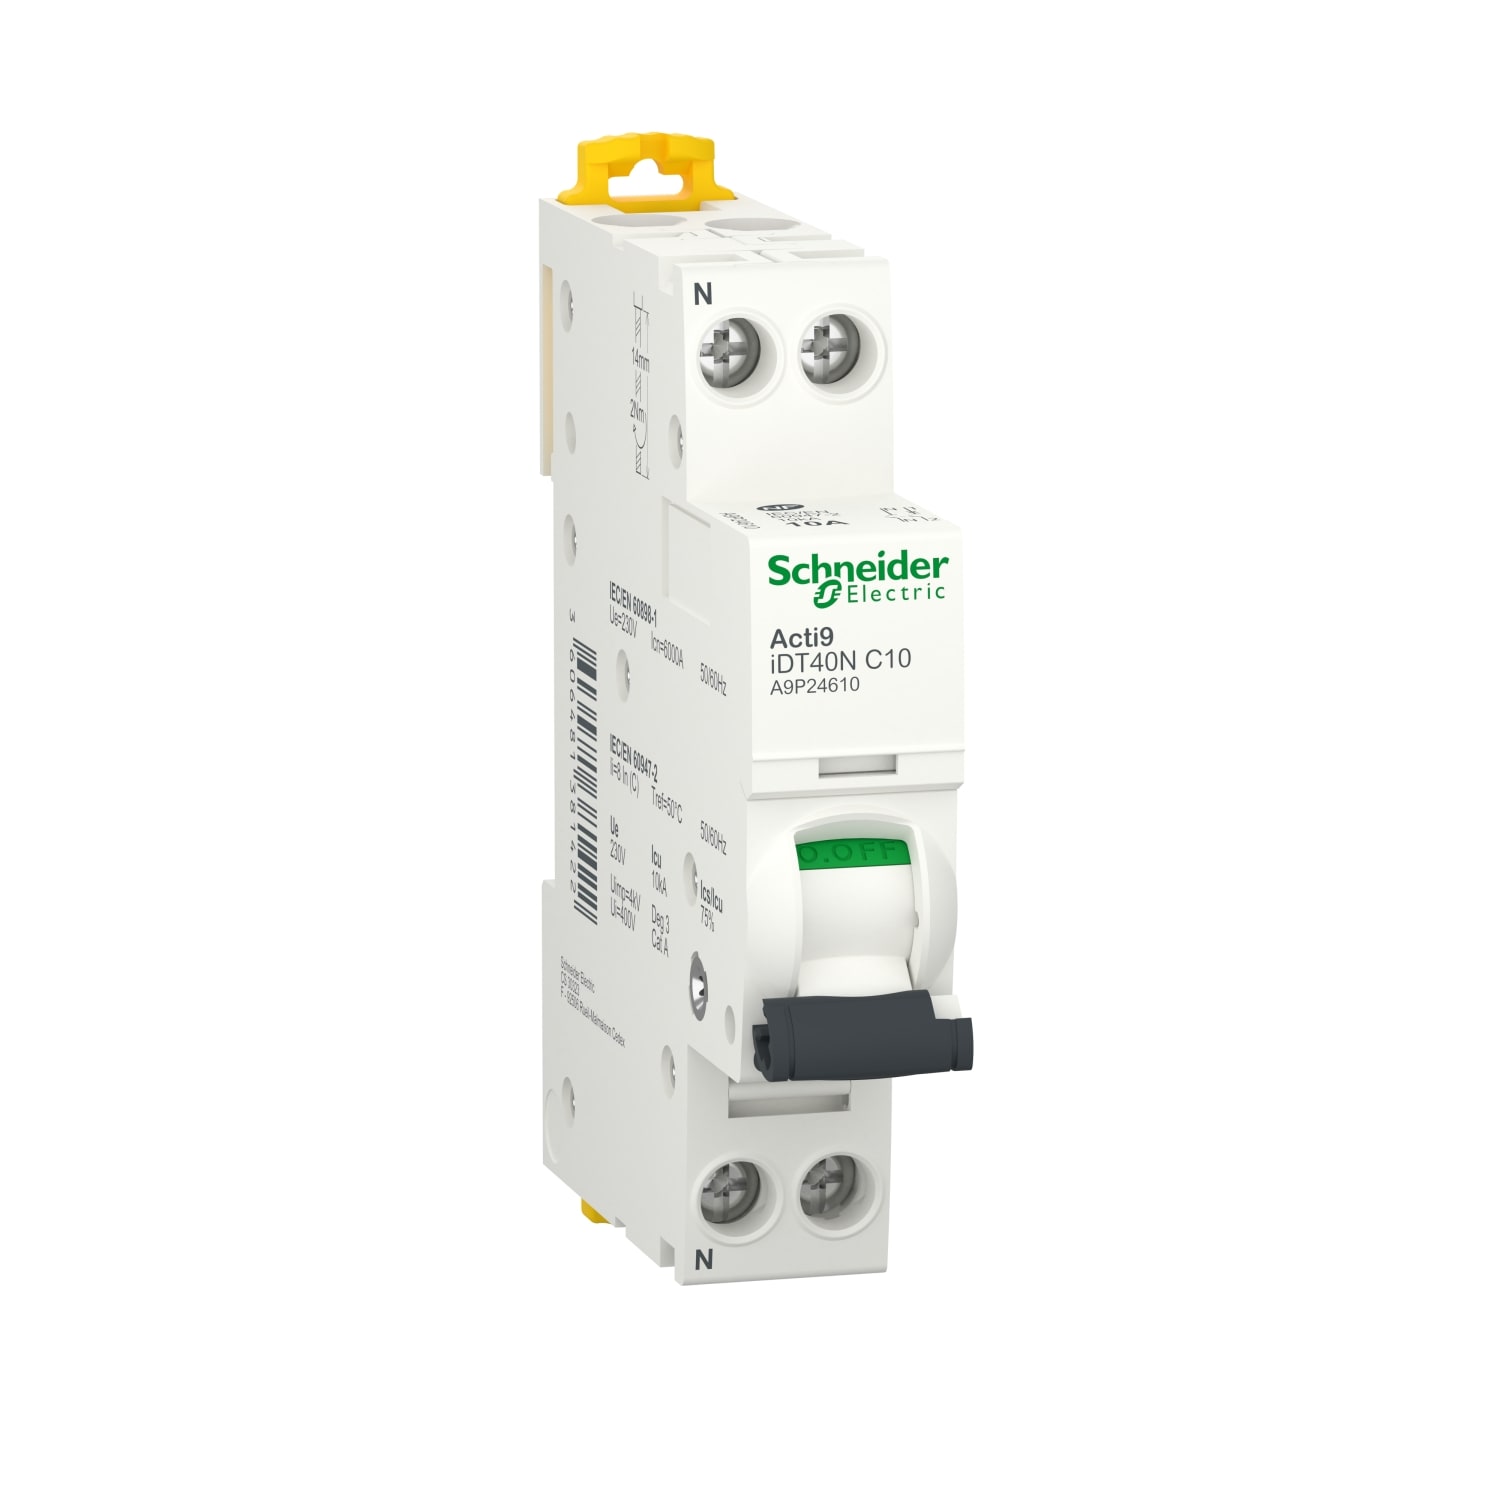 Schneider Electric - Acti9 iDT40N - Disjoncteur modulaire - 1P+N - 10A - Courbe C - 6000A-10kA